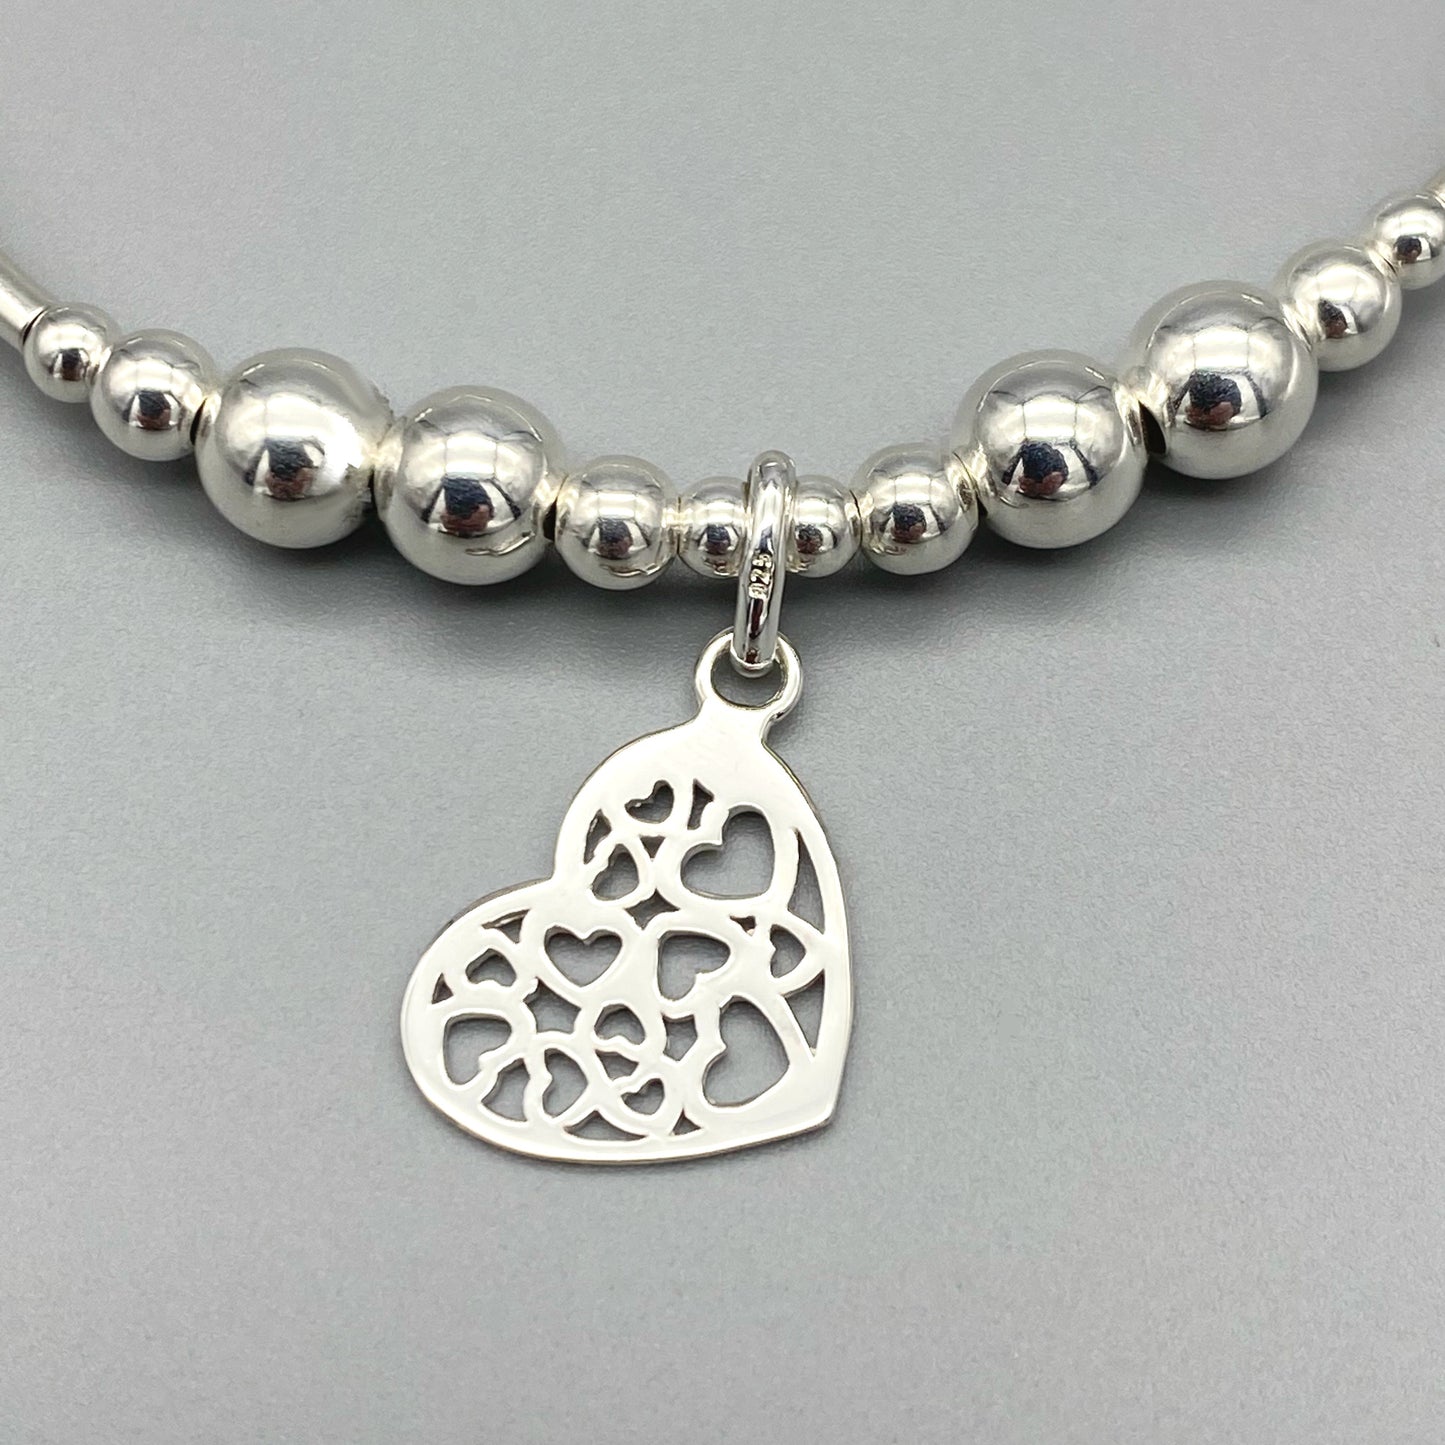 Closeup of Heart charm filigree sterling silver hand-made women's stacking bracelet by My Silver Wish